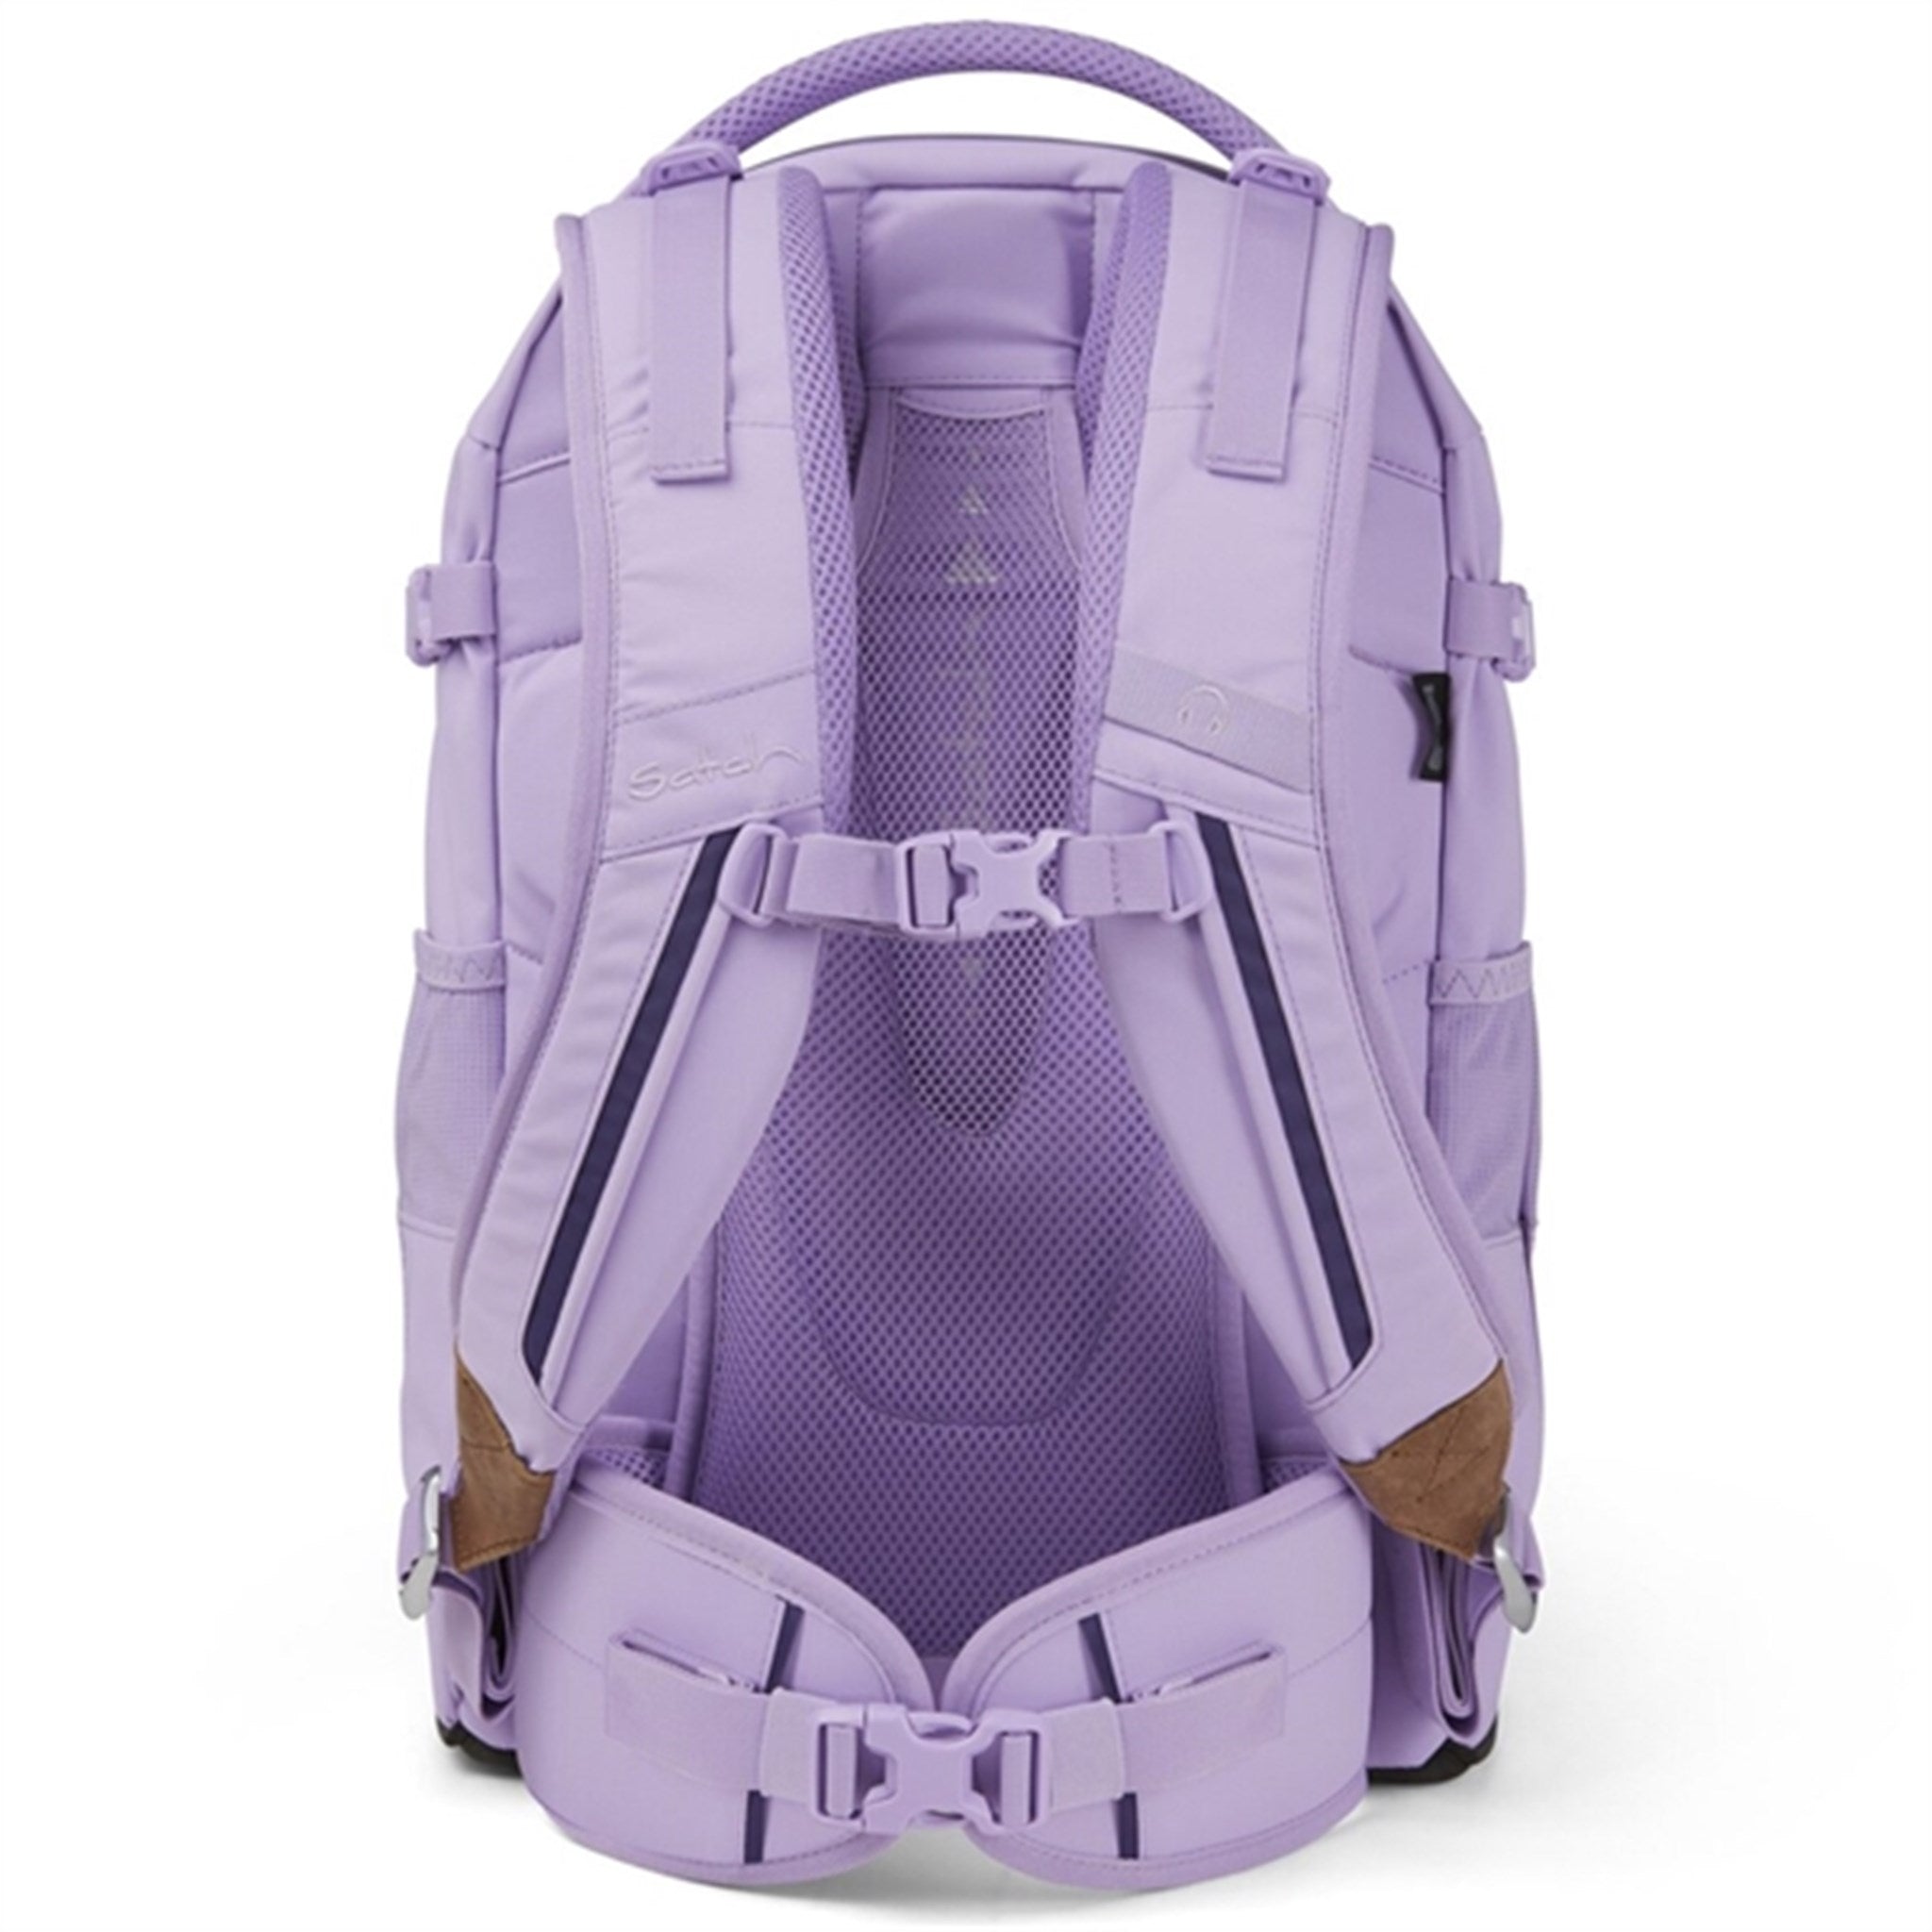 Satch Pack School Bag Special Edition Nordic Purple 3